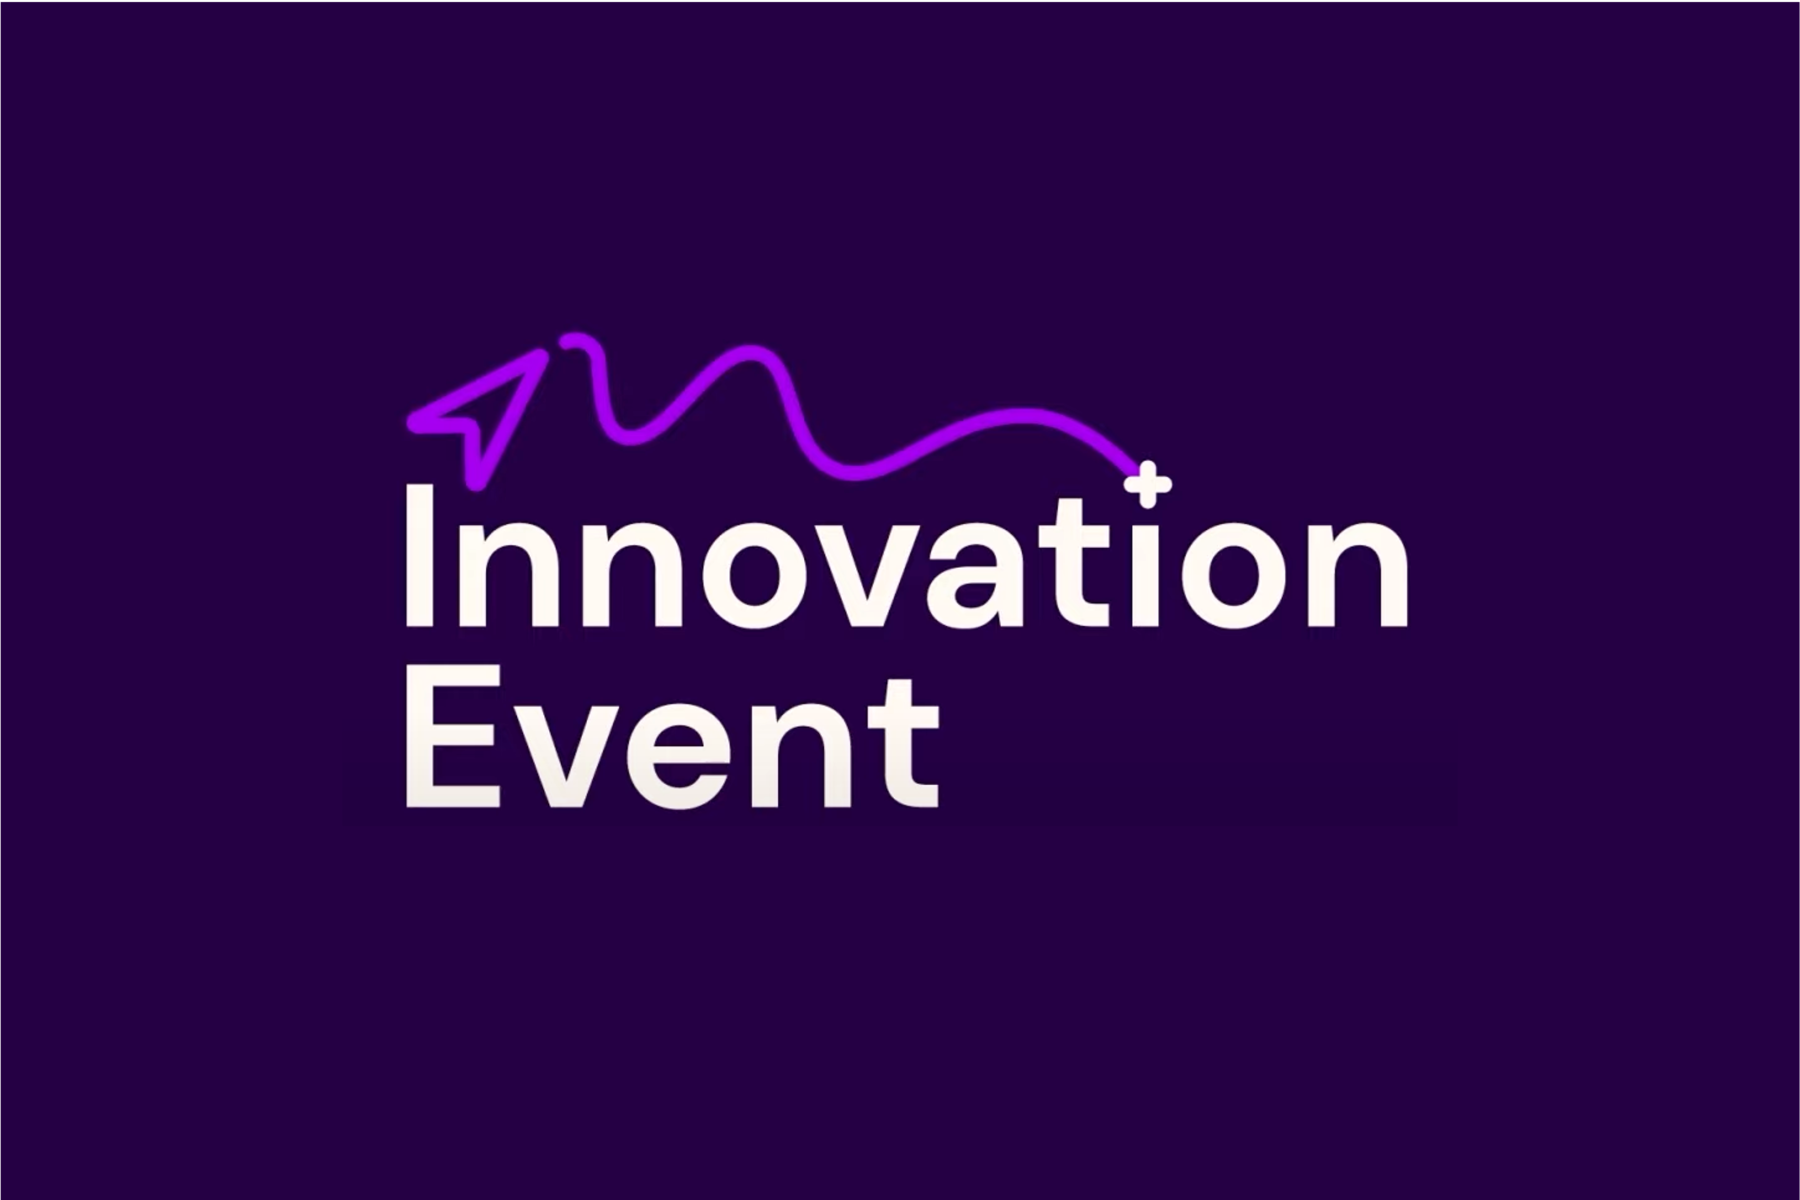 White logo text reading "Innovation Event" on a dark purple background